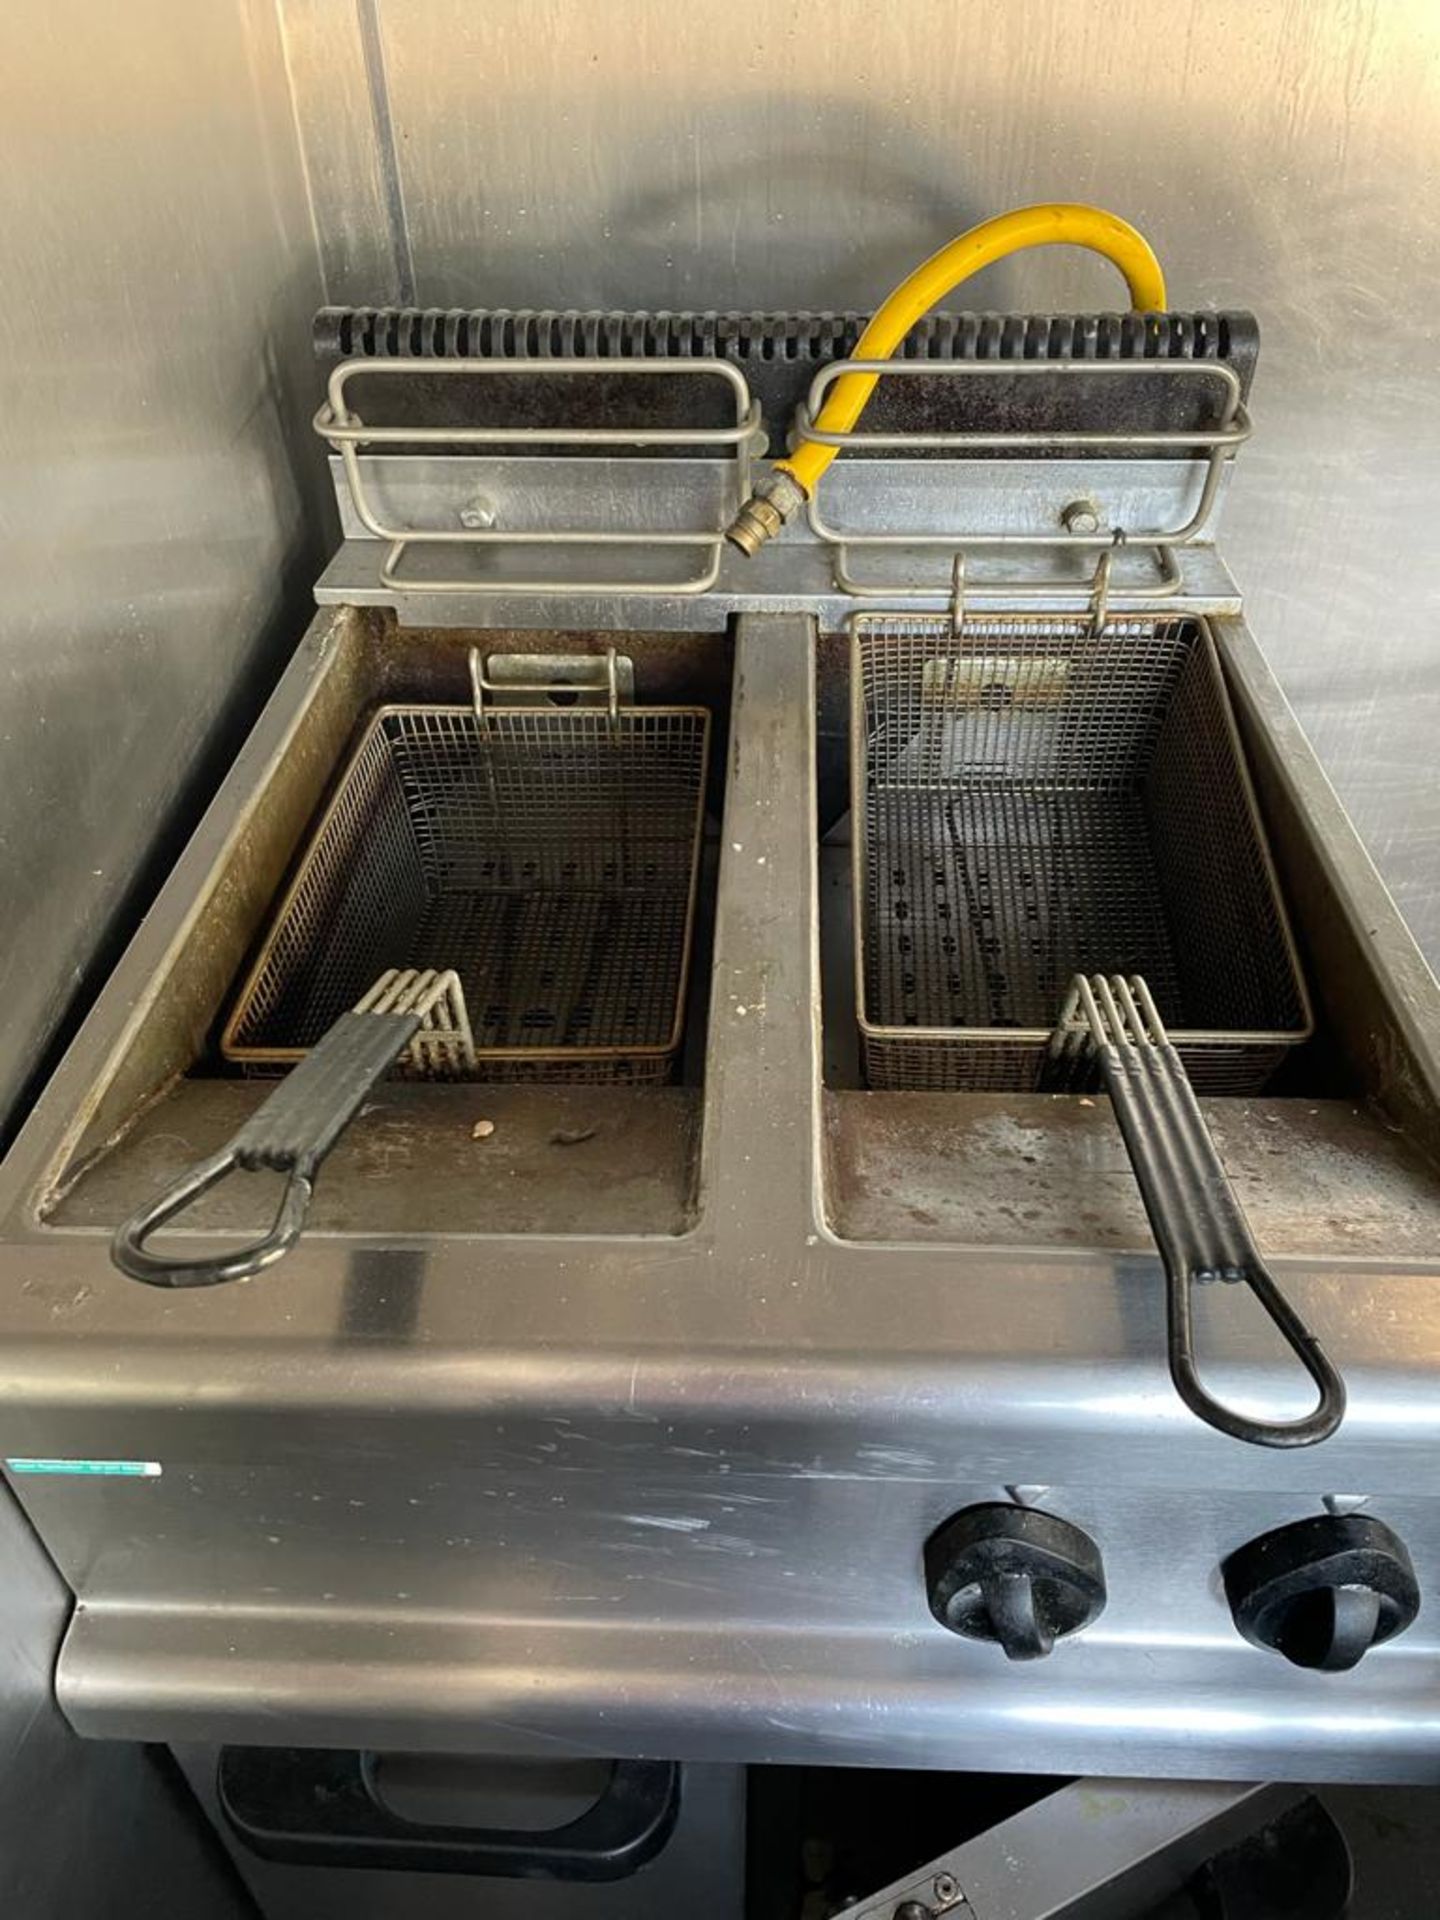 1 x Lincat Twin Tank Fryer With Baskets - Gas Fired - CL667 - Location: Brighton, Sussex, - Image 2 of 4